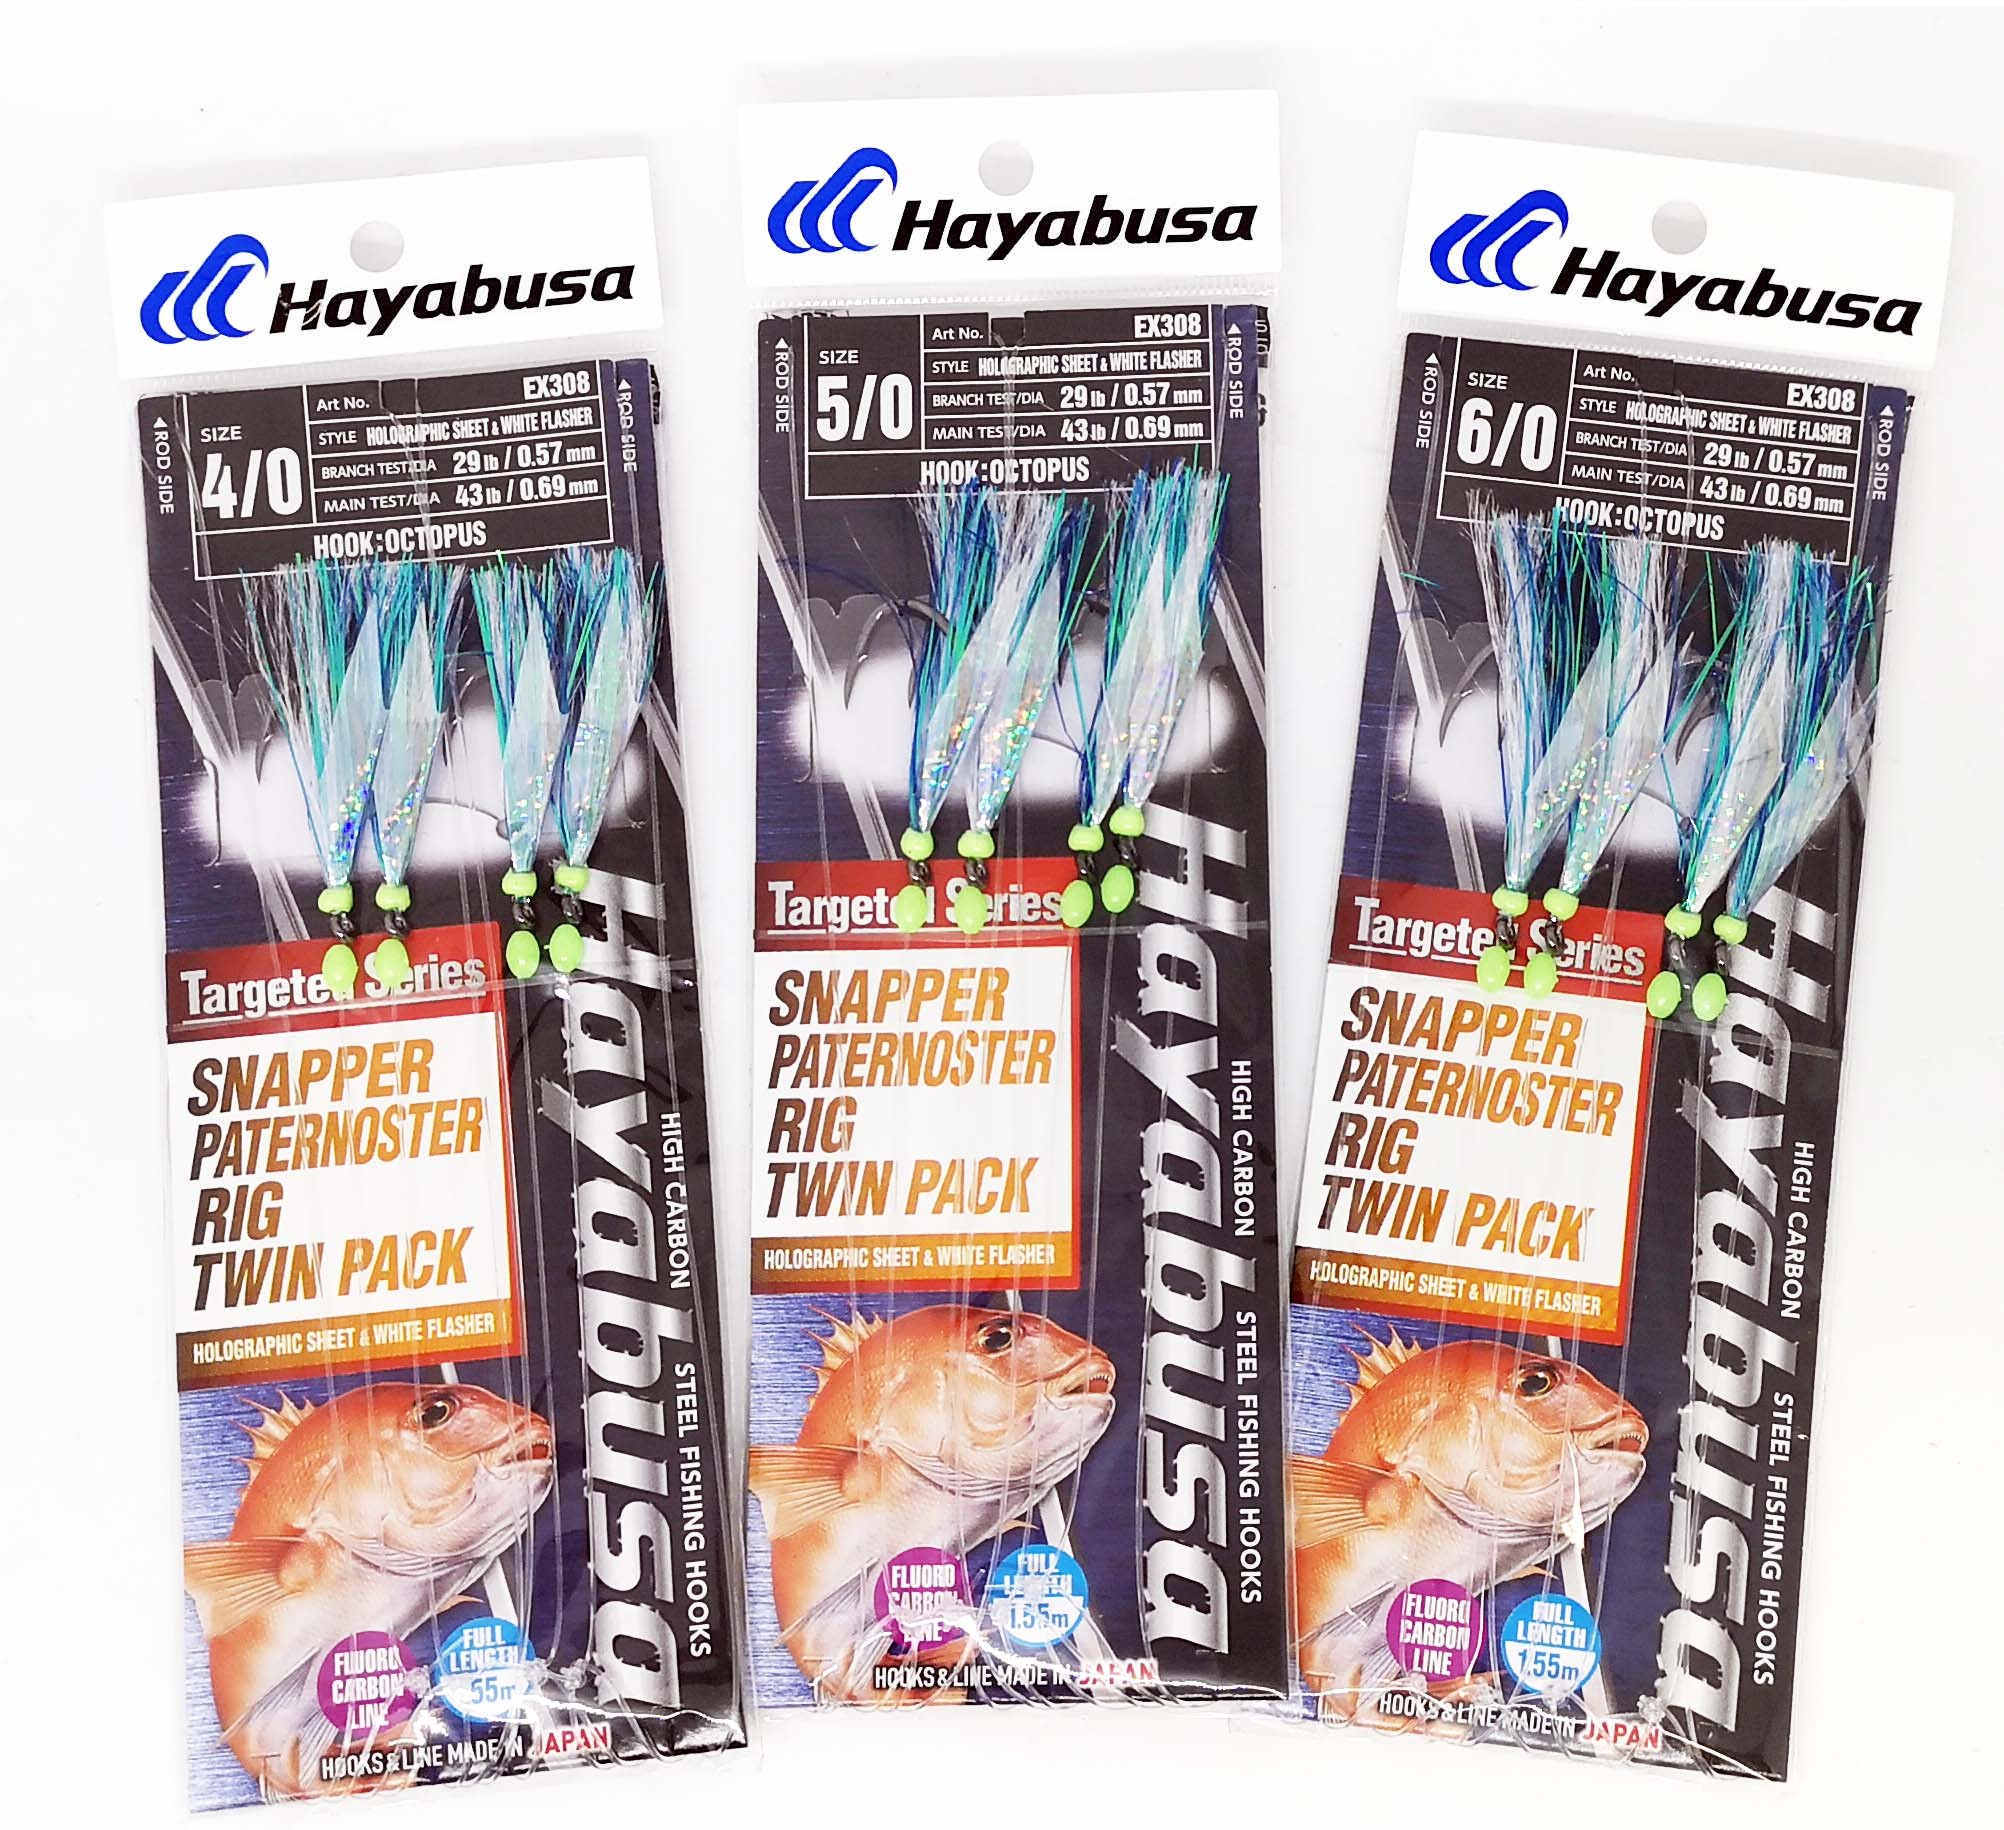 Hayabusa Snapper Paternoster Flasher Rig Twin Pack EX306 